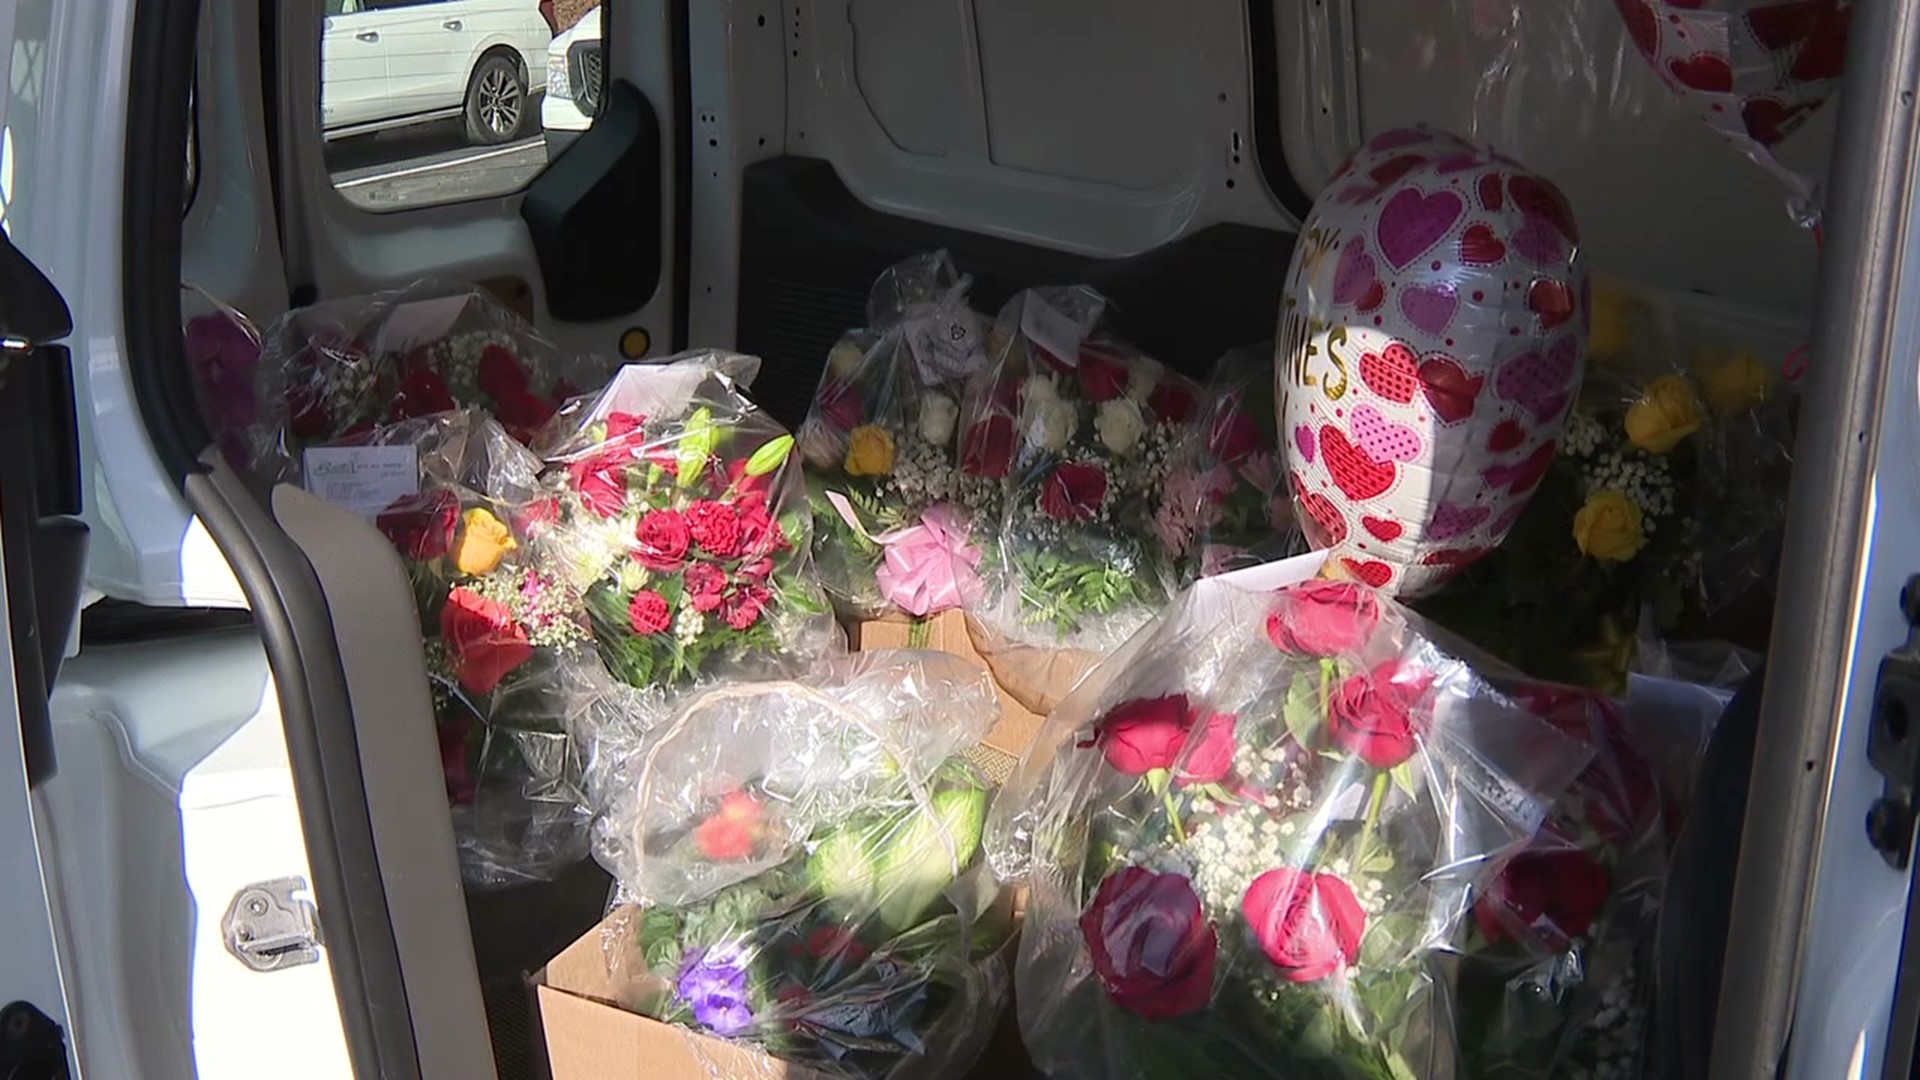 Newswatch 16's Nikki Krize stopped by a flower shop in Montour County to see how the day was going.